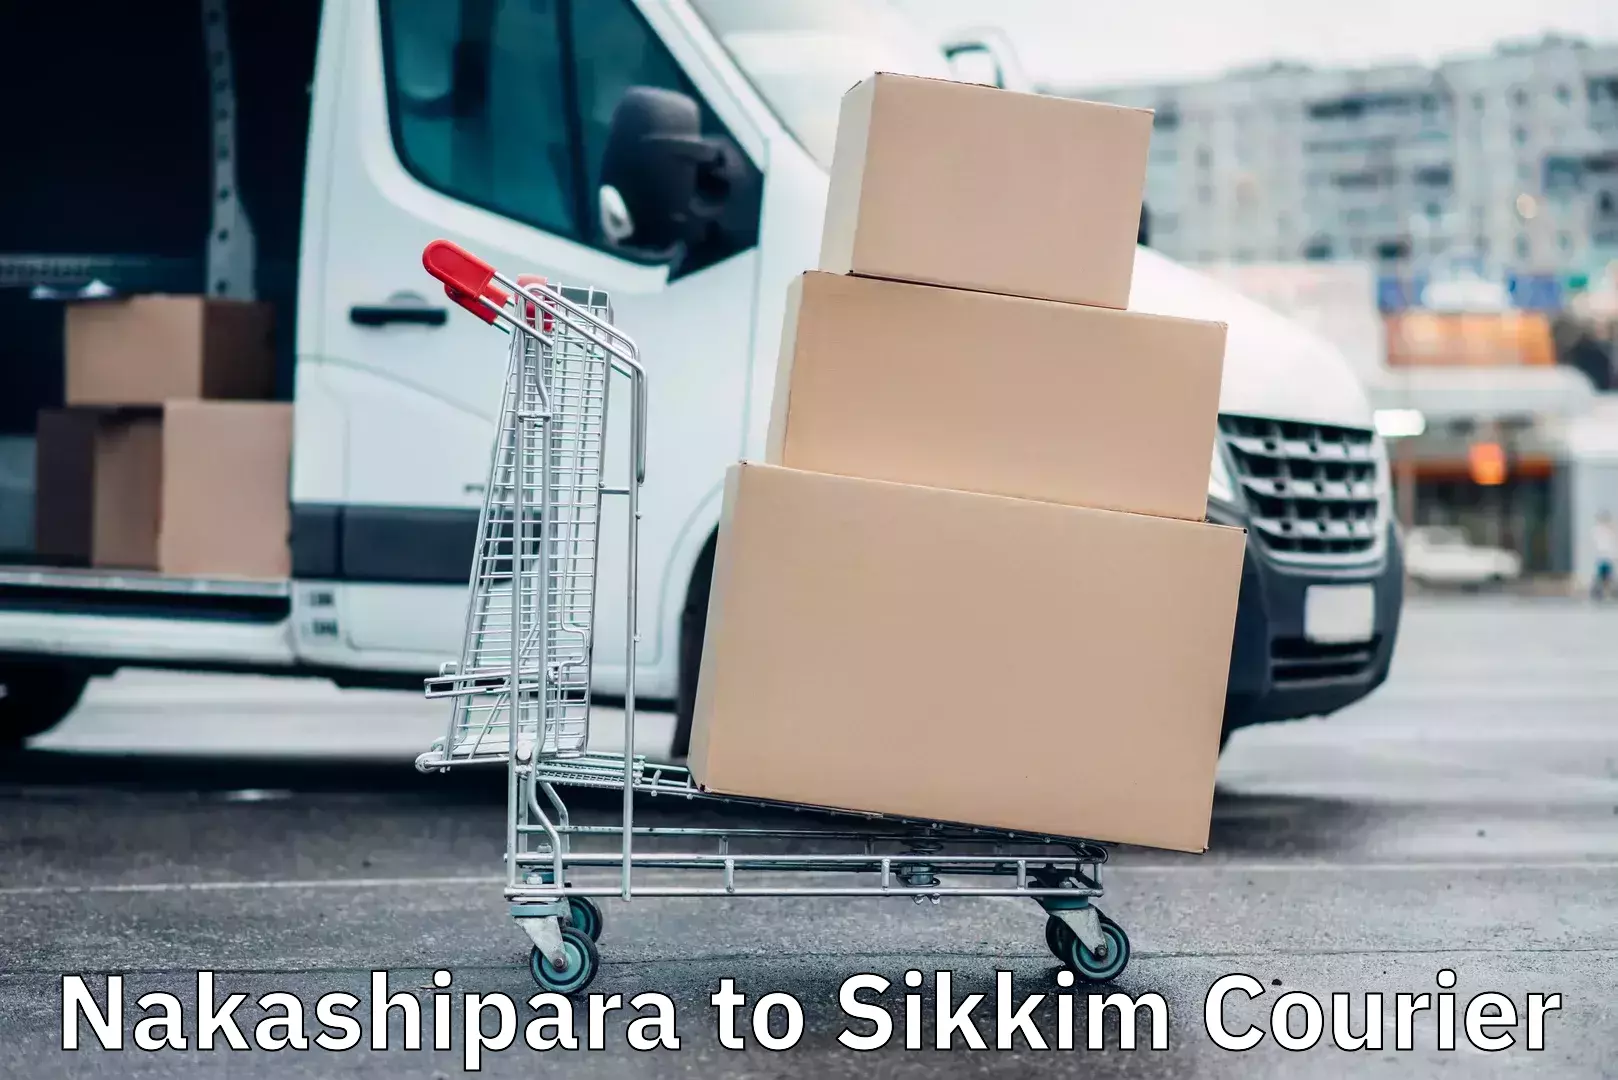 Next-day delivery options in Nakashipara to Sikkim